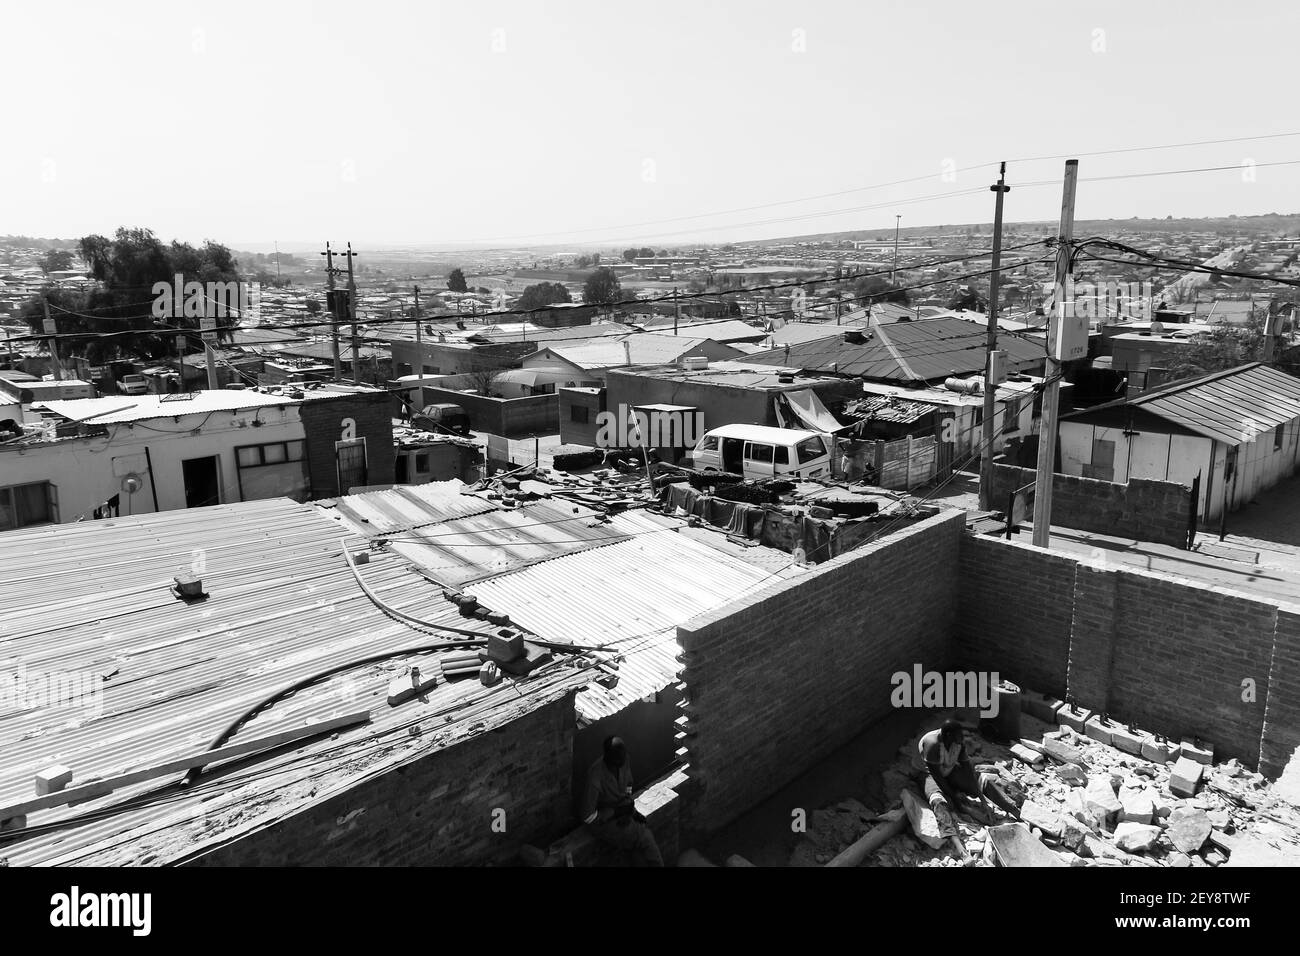 JOHANNESBURG, SOUTH AFRICA - Jan 05, 2021: Johannesburg, South Africa - August 29 2013: High Angle rooftop view of low income houses in Alexandra town Stock Photo